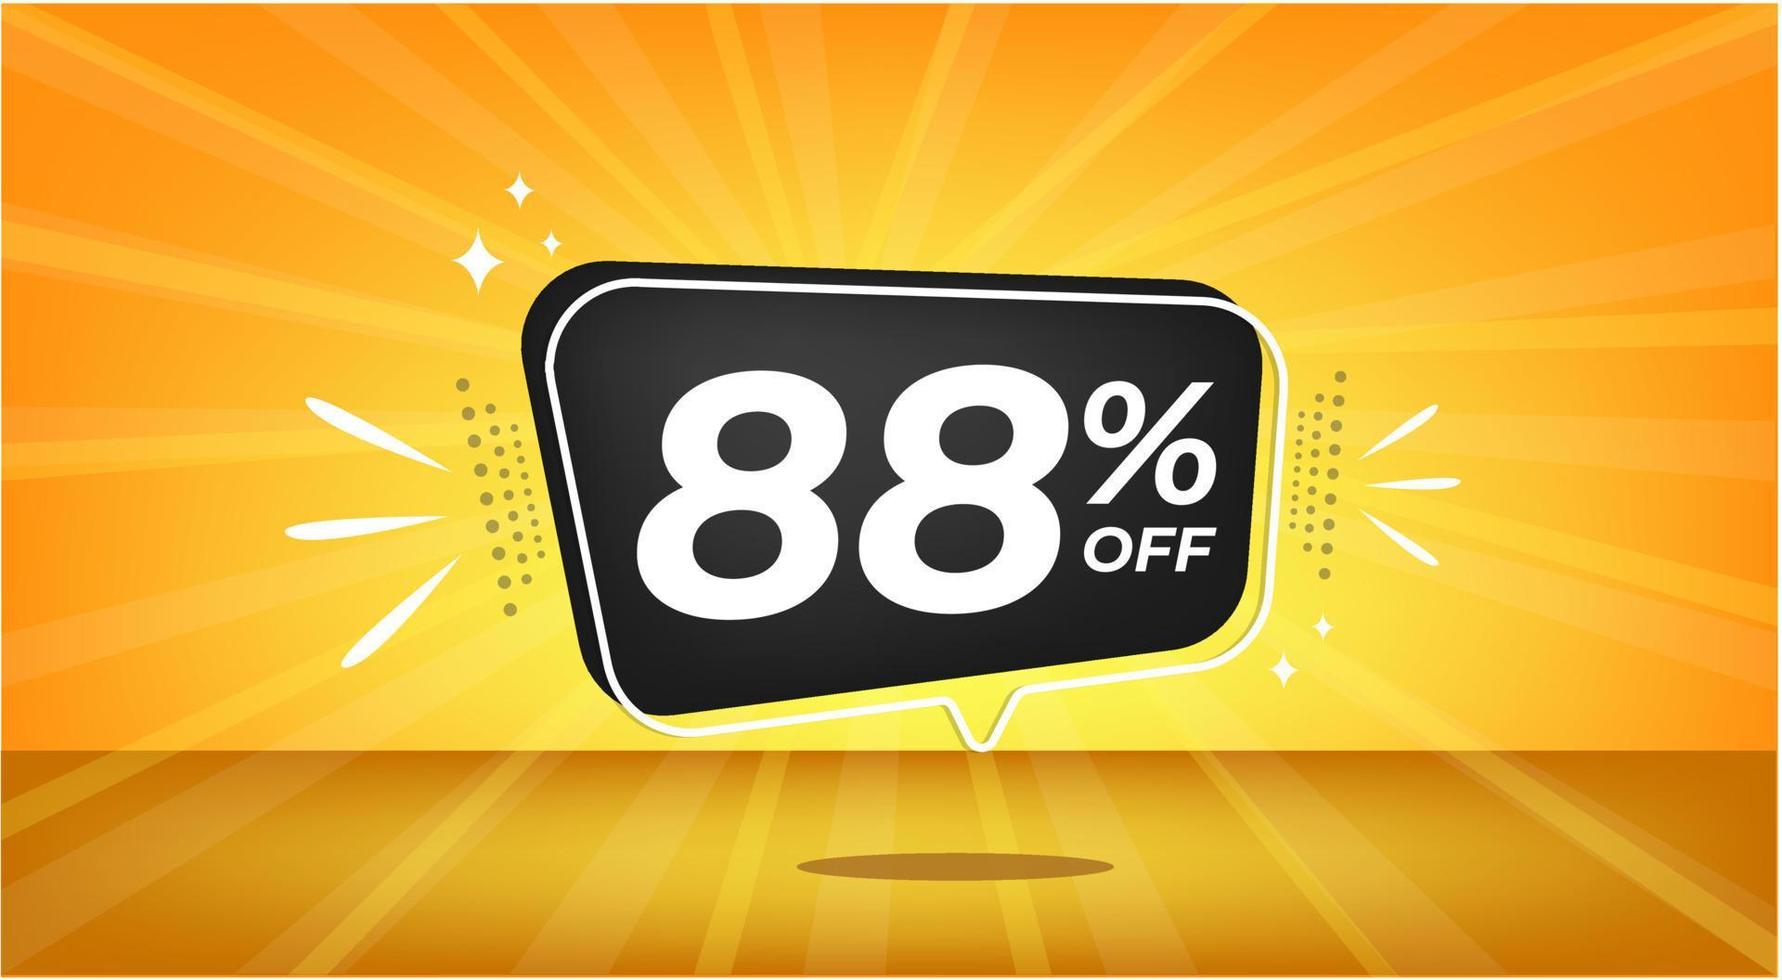 88 percent off. Yellow banner with eighty-eight percent discount on a black balloon for mega big sales. vector